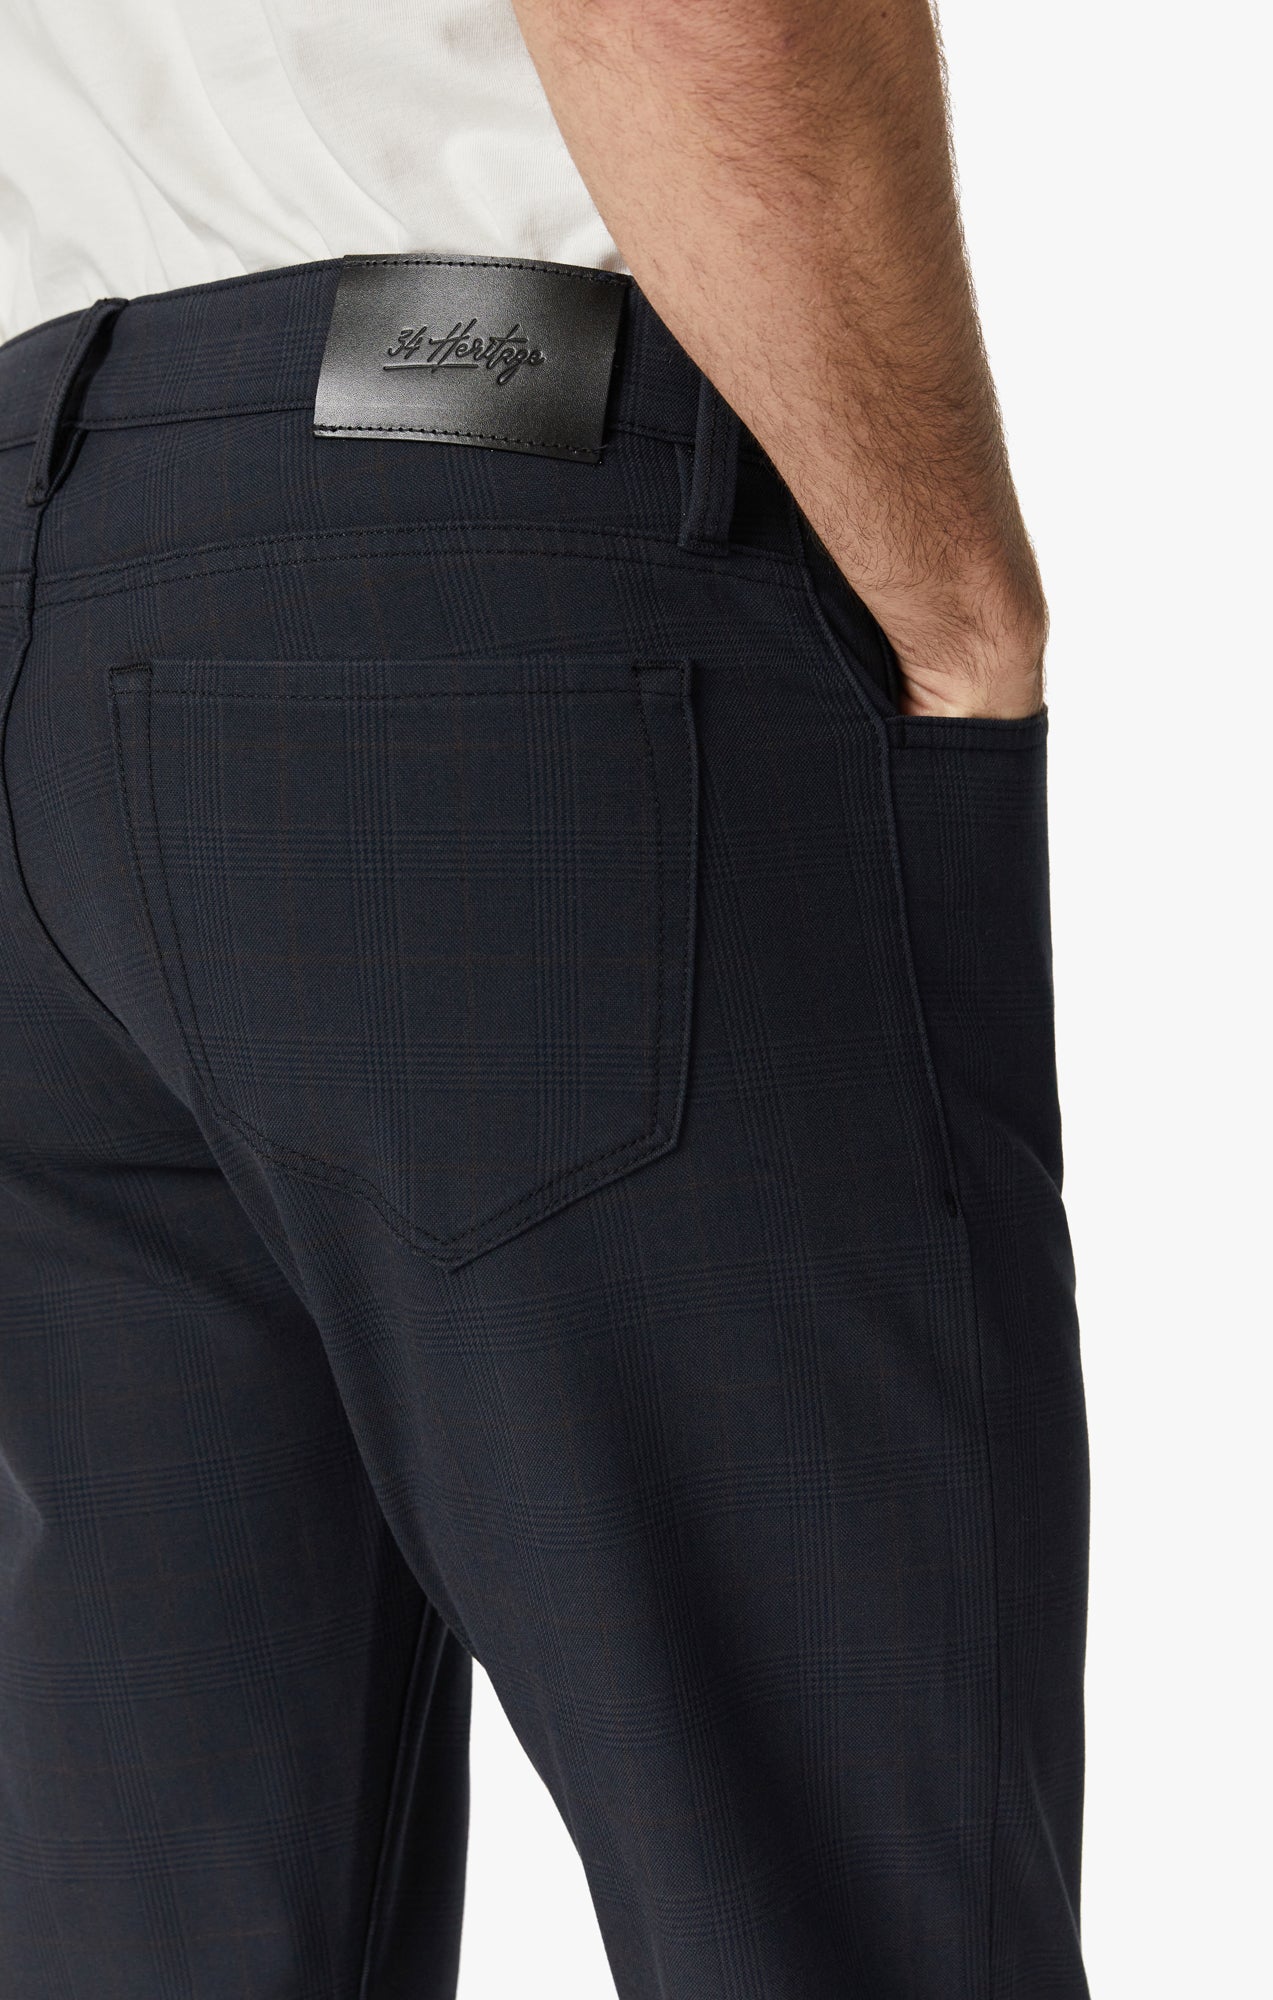 Cool Tapered Leg Pants In Navy Elite Check Image 5